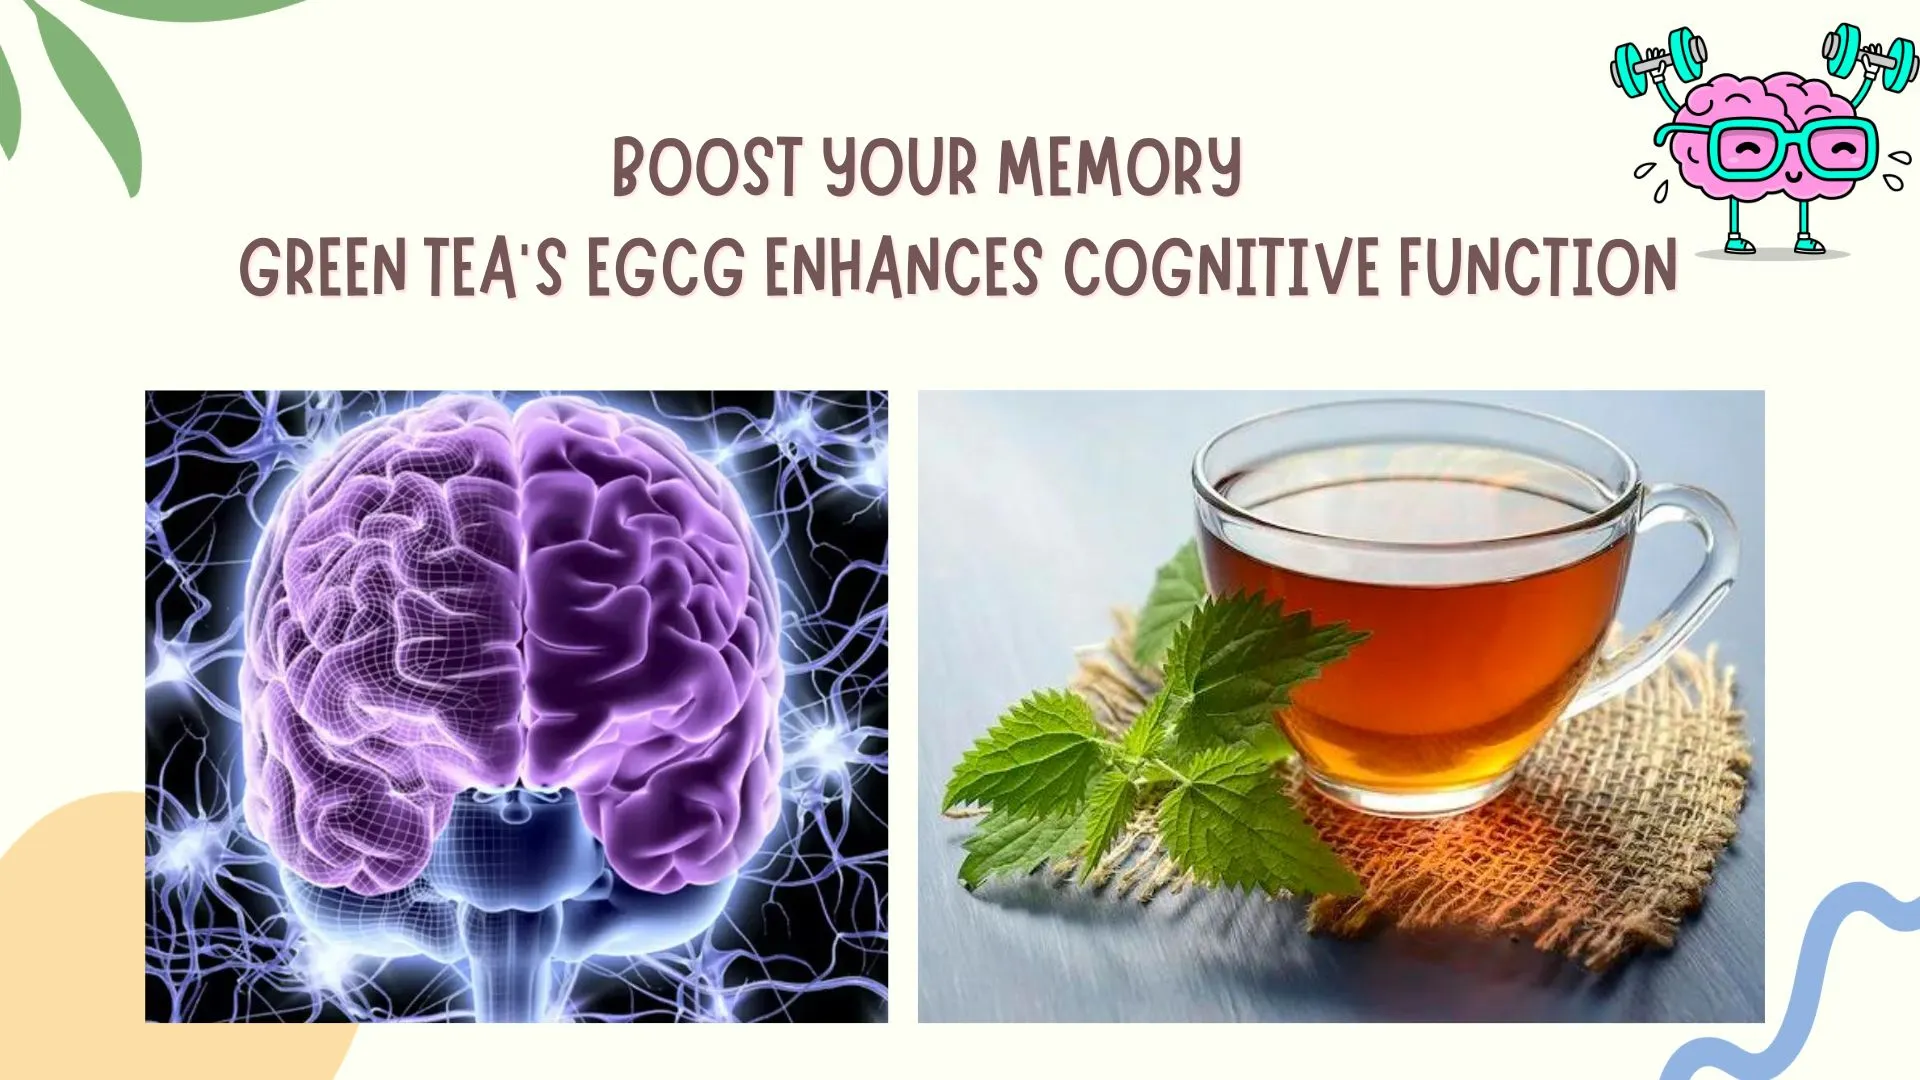 Boost Your Memory with Green Tea